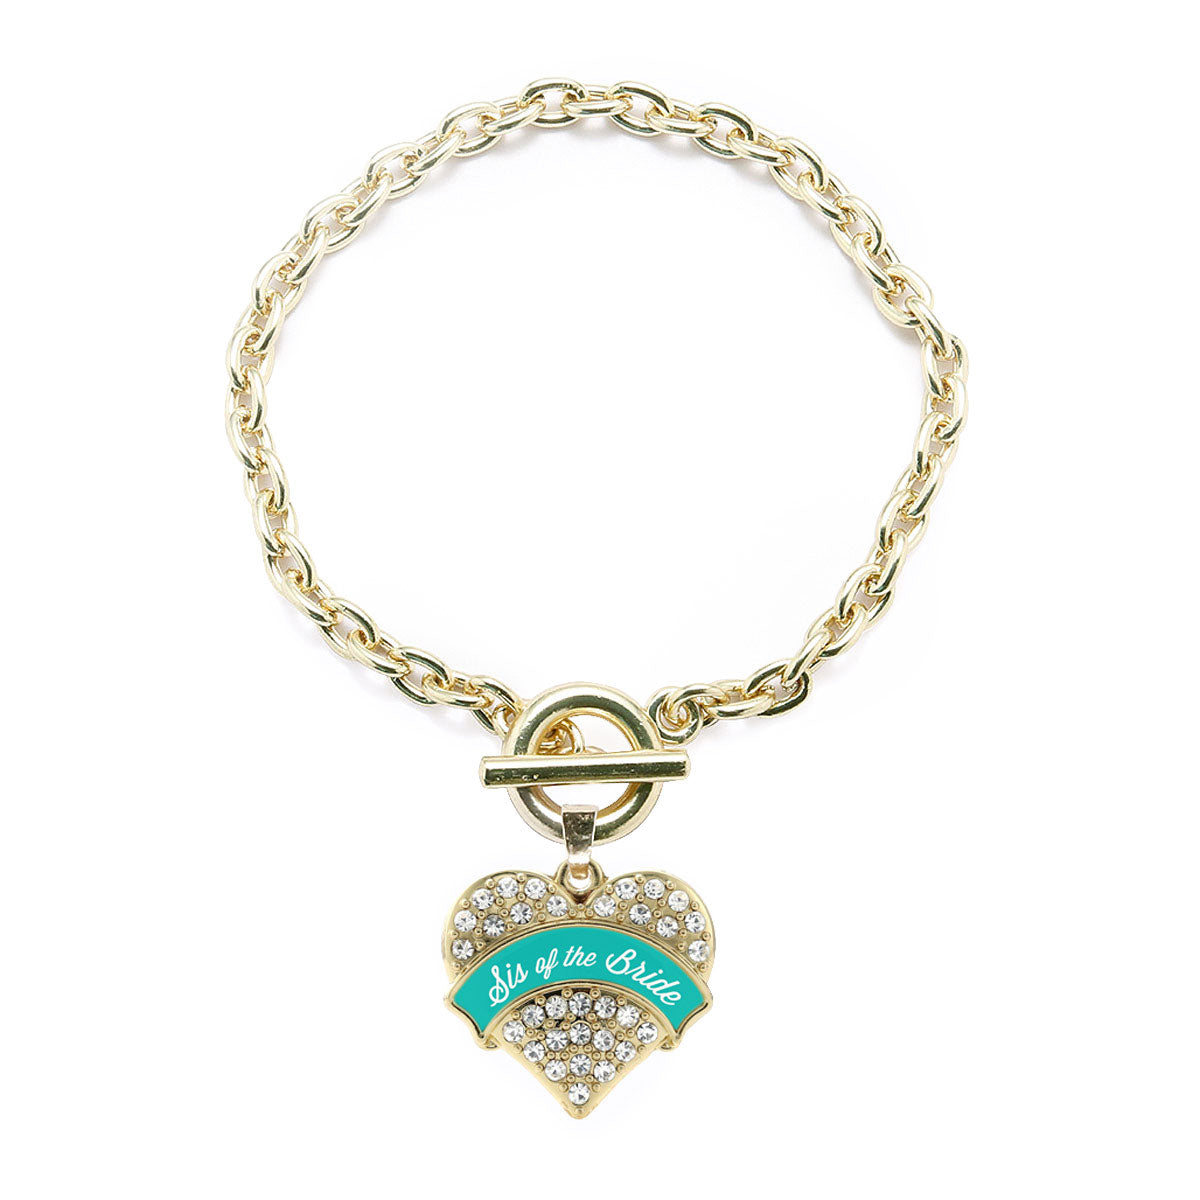 Gold Teal Sis of the Bride Pave Heart Charm Toggle Bracelet